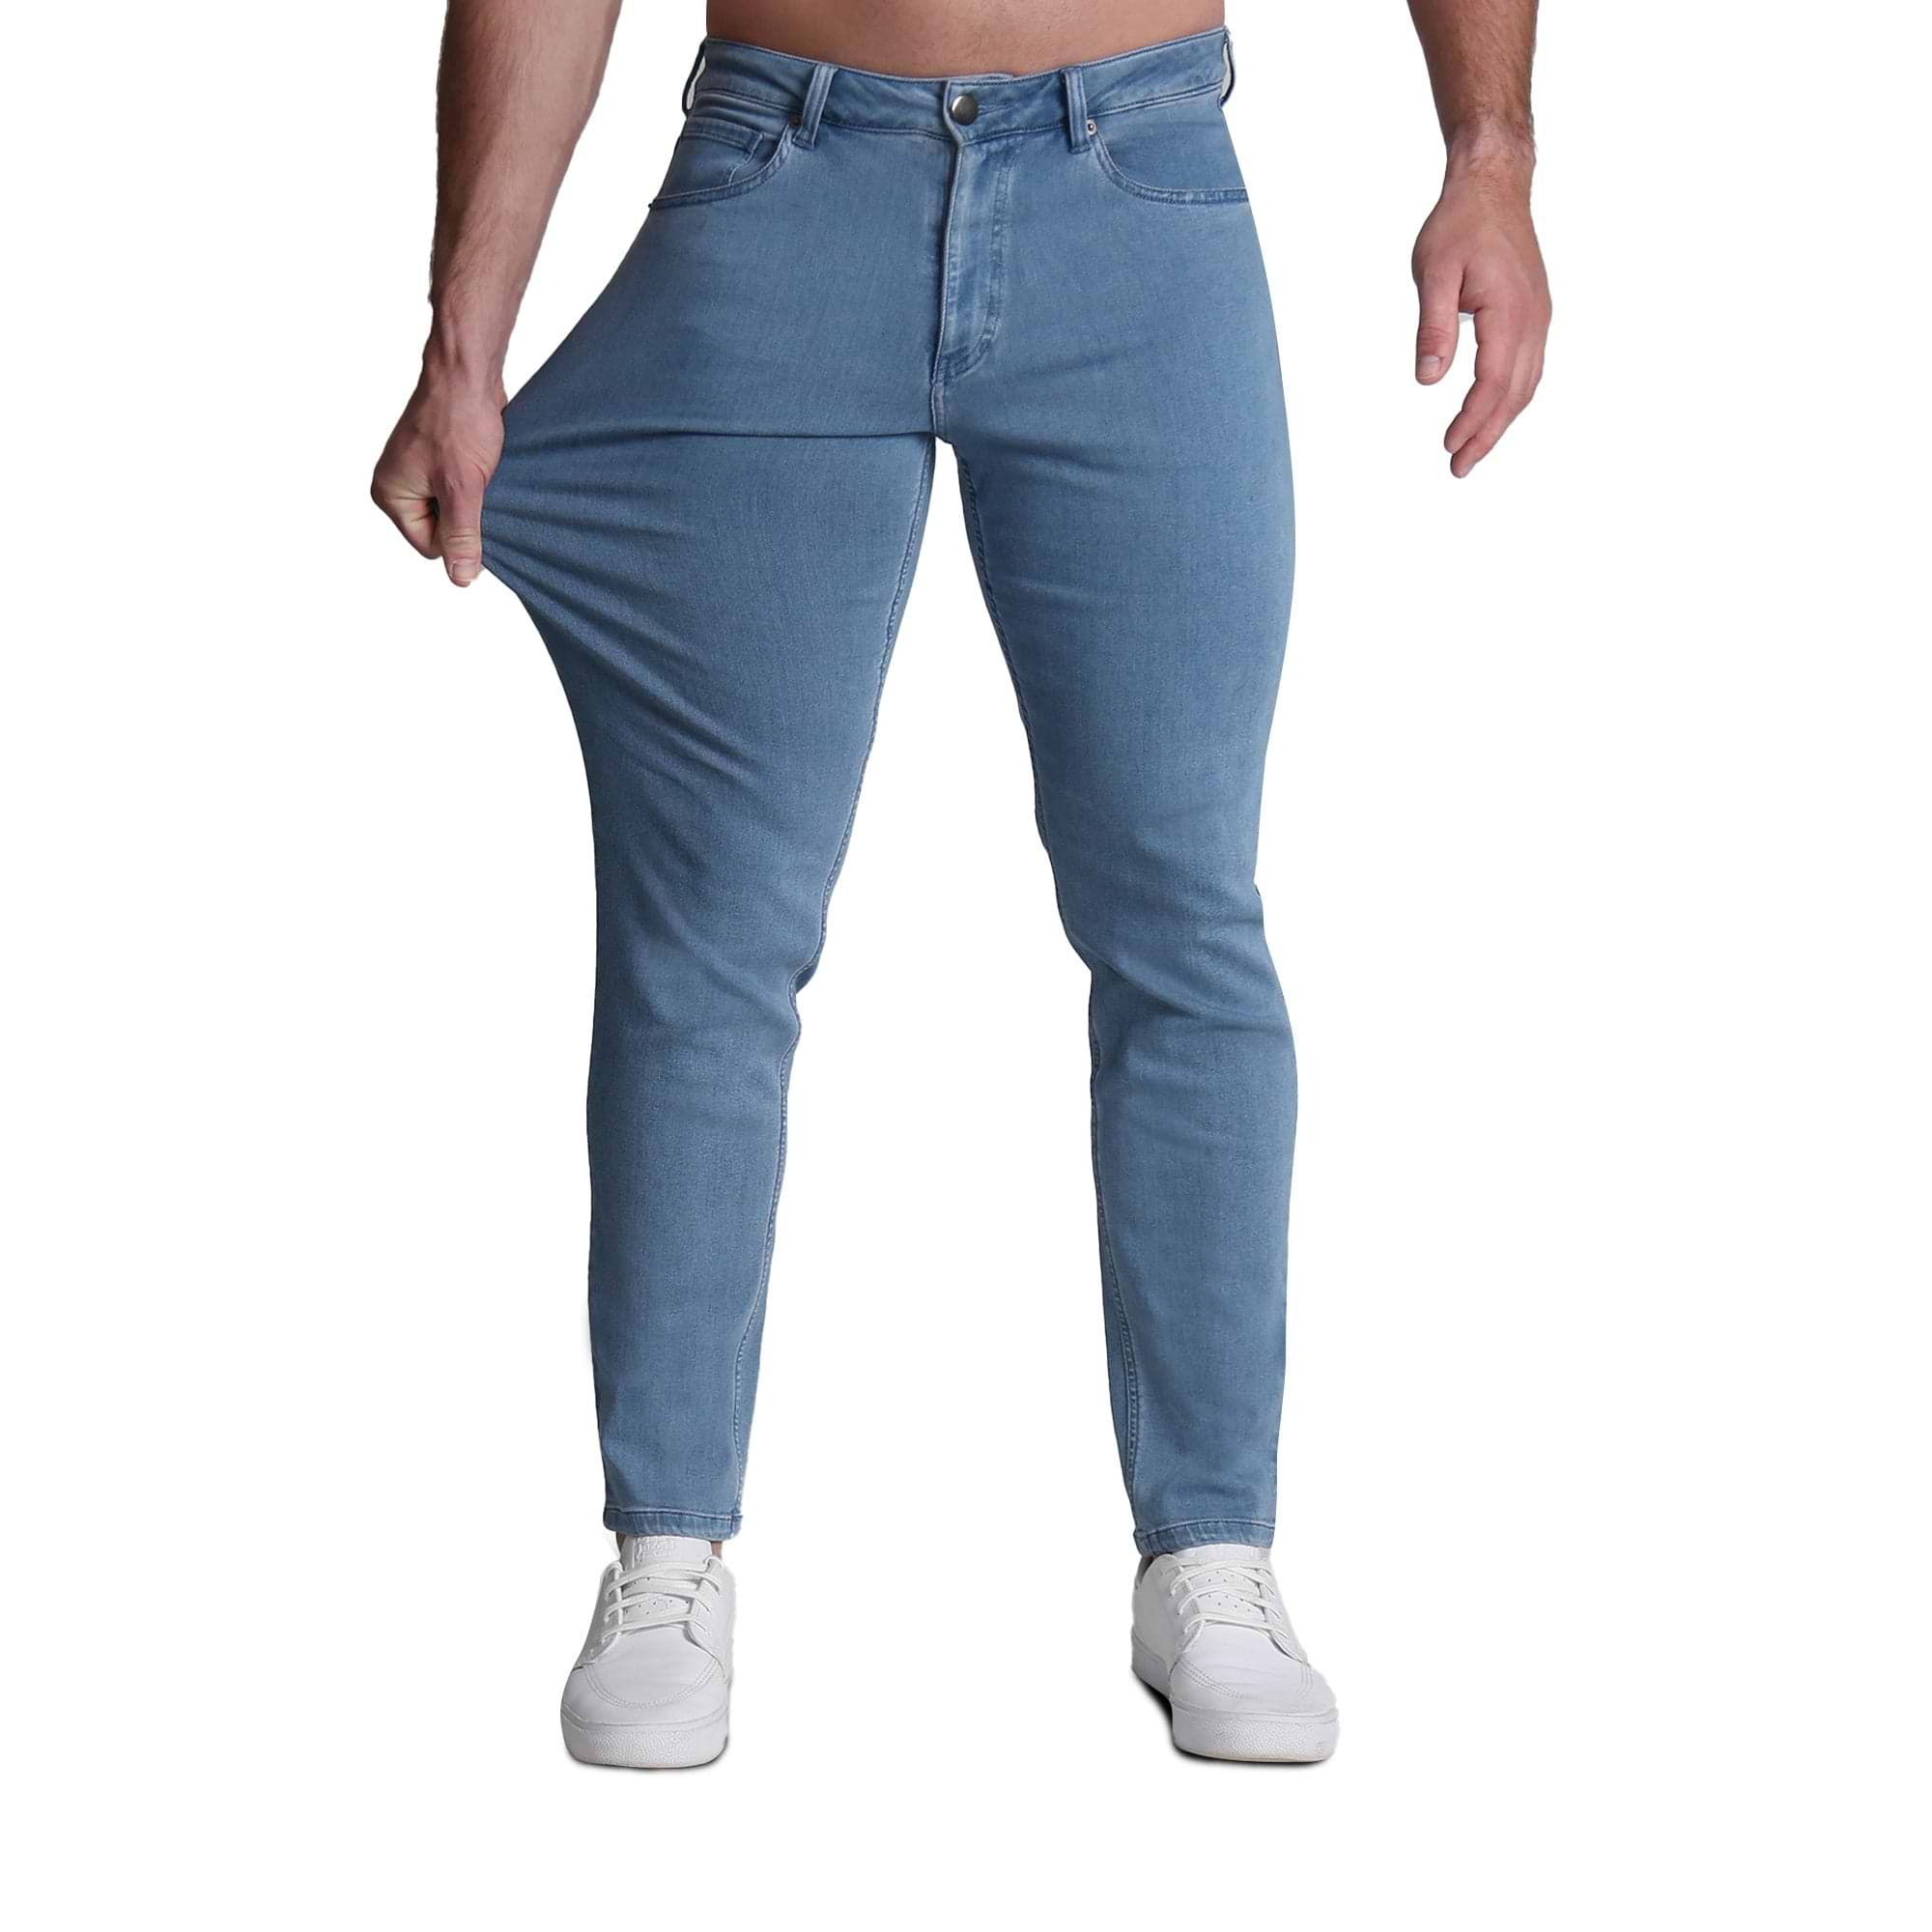 Men's Blue Athletic Straight Fit Stretch Jeans